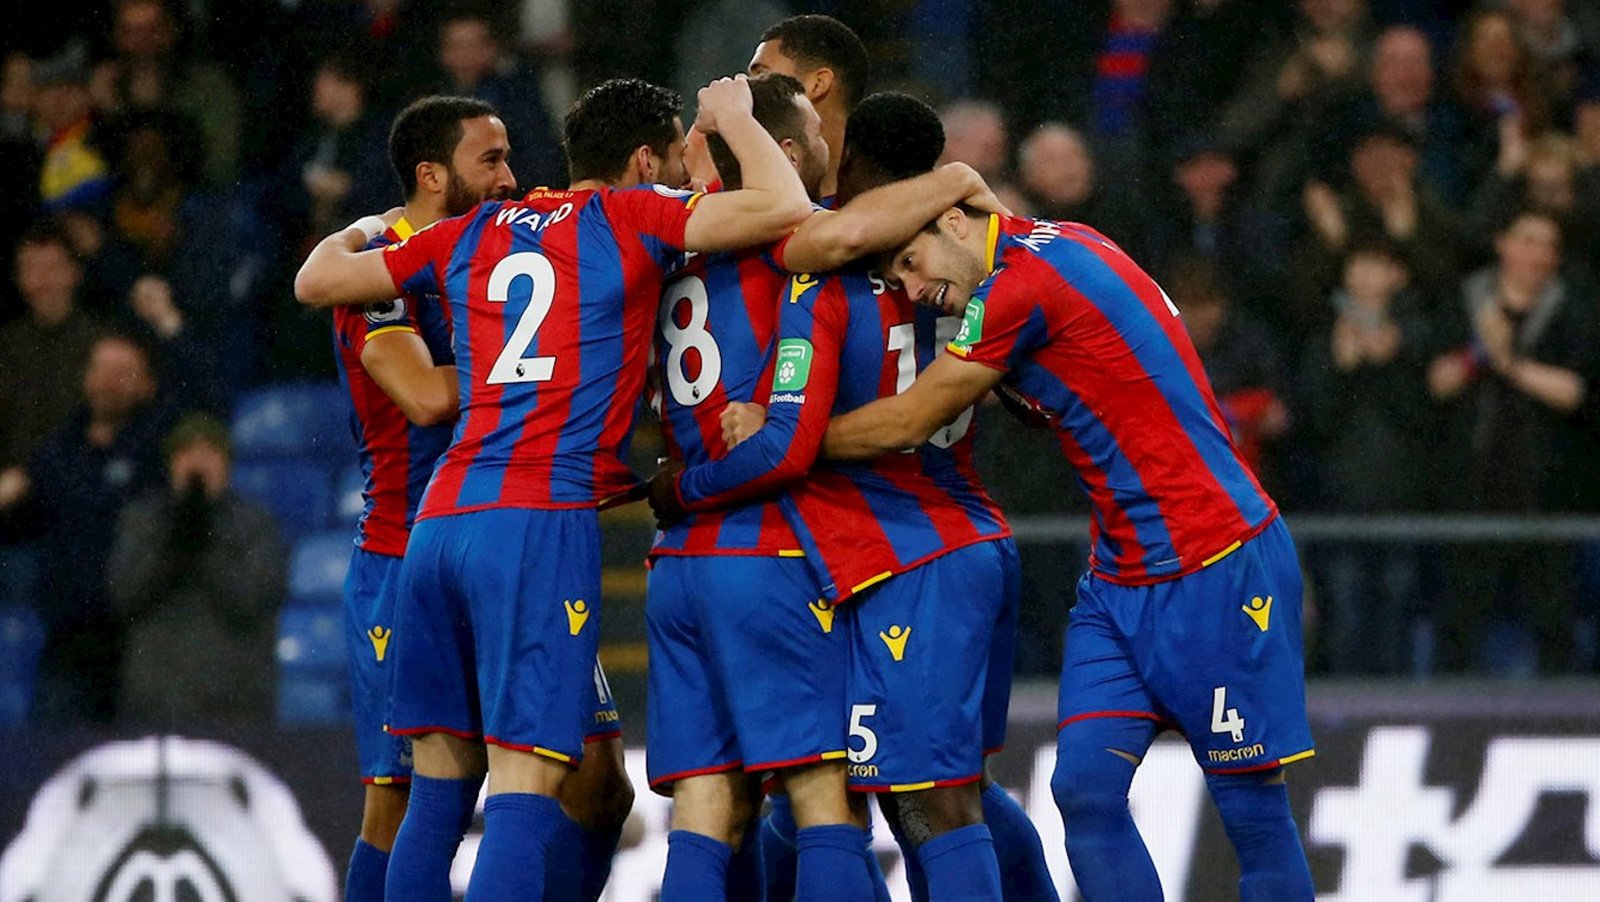 EPL review week 31: Palace pull clear; West Brom and Stoke sink further